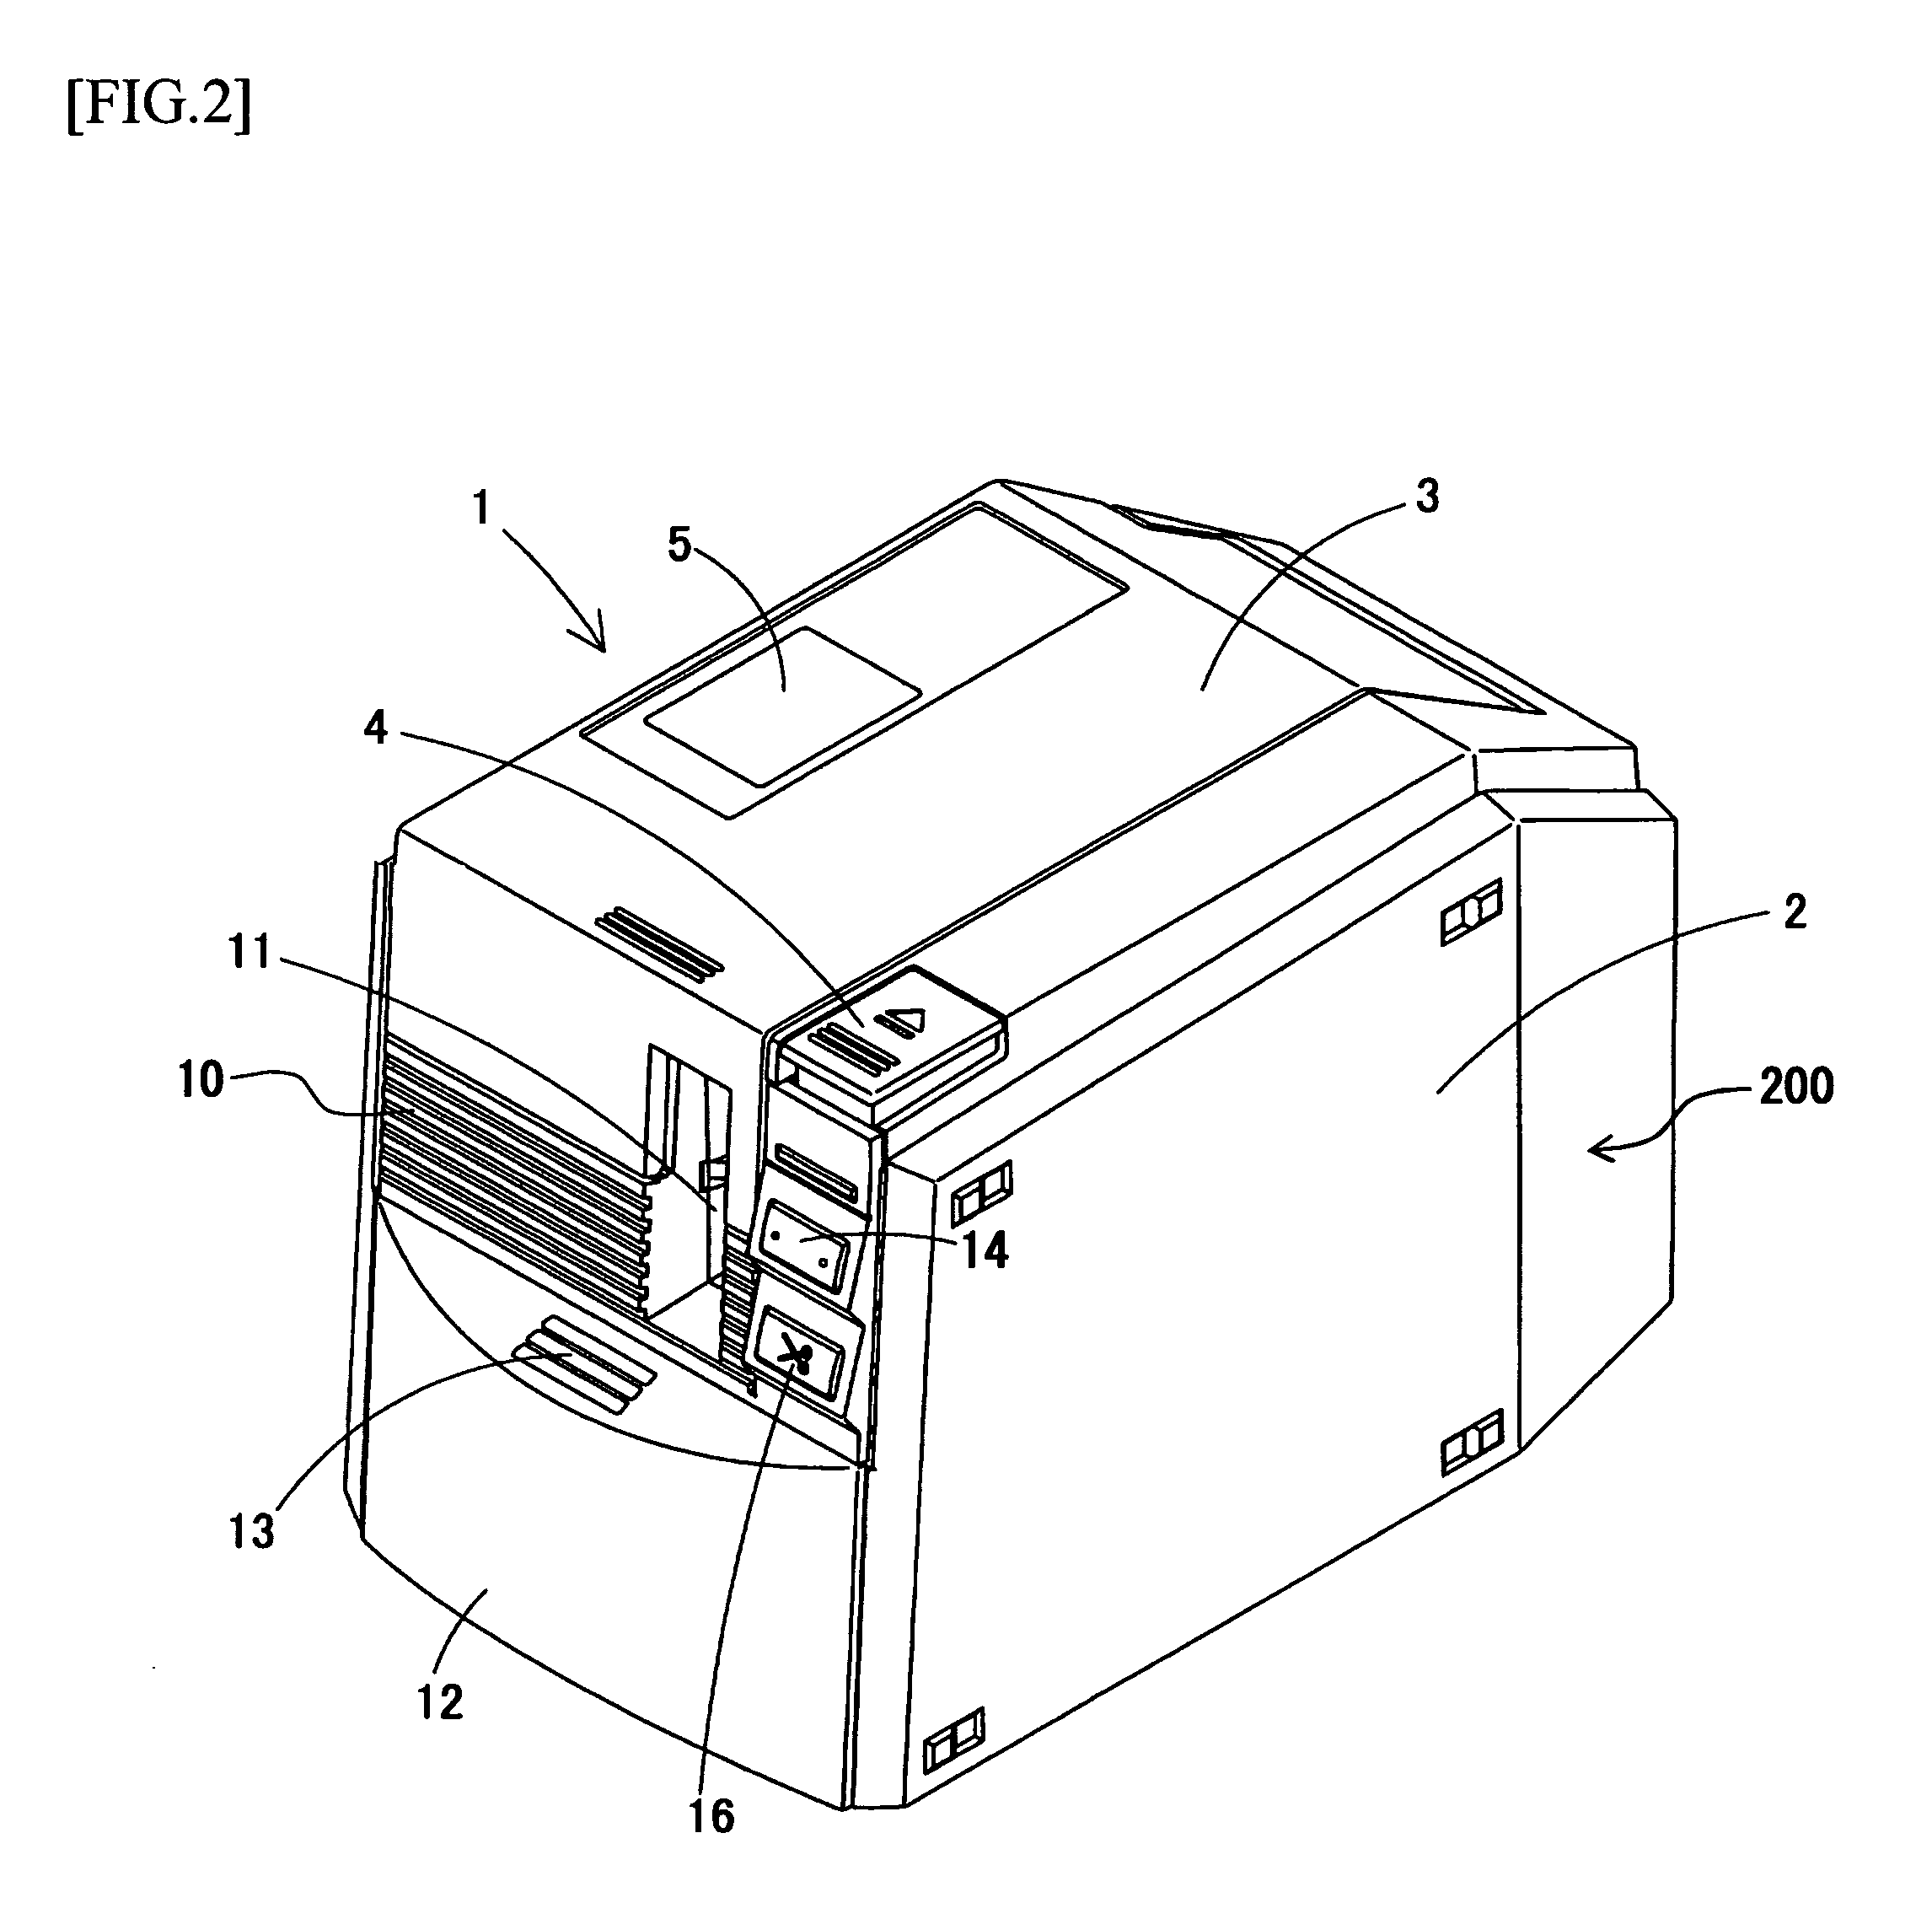 Label tape, label tape cartridge, and label producing apparatus